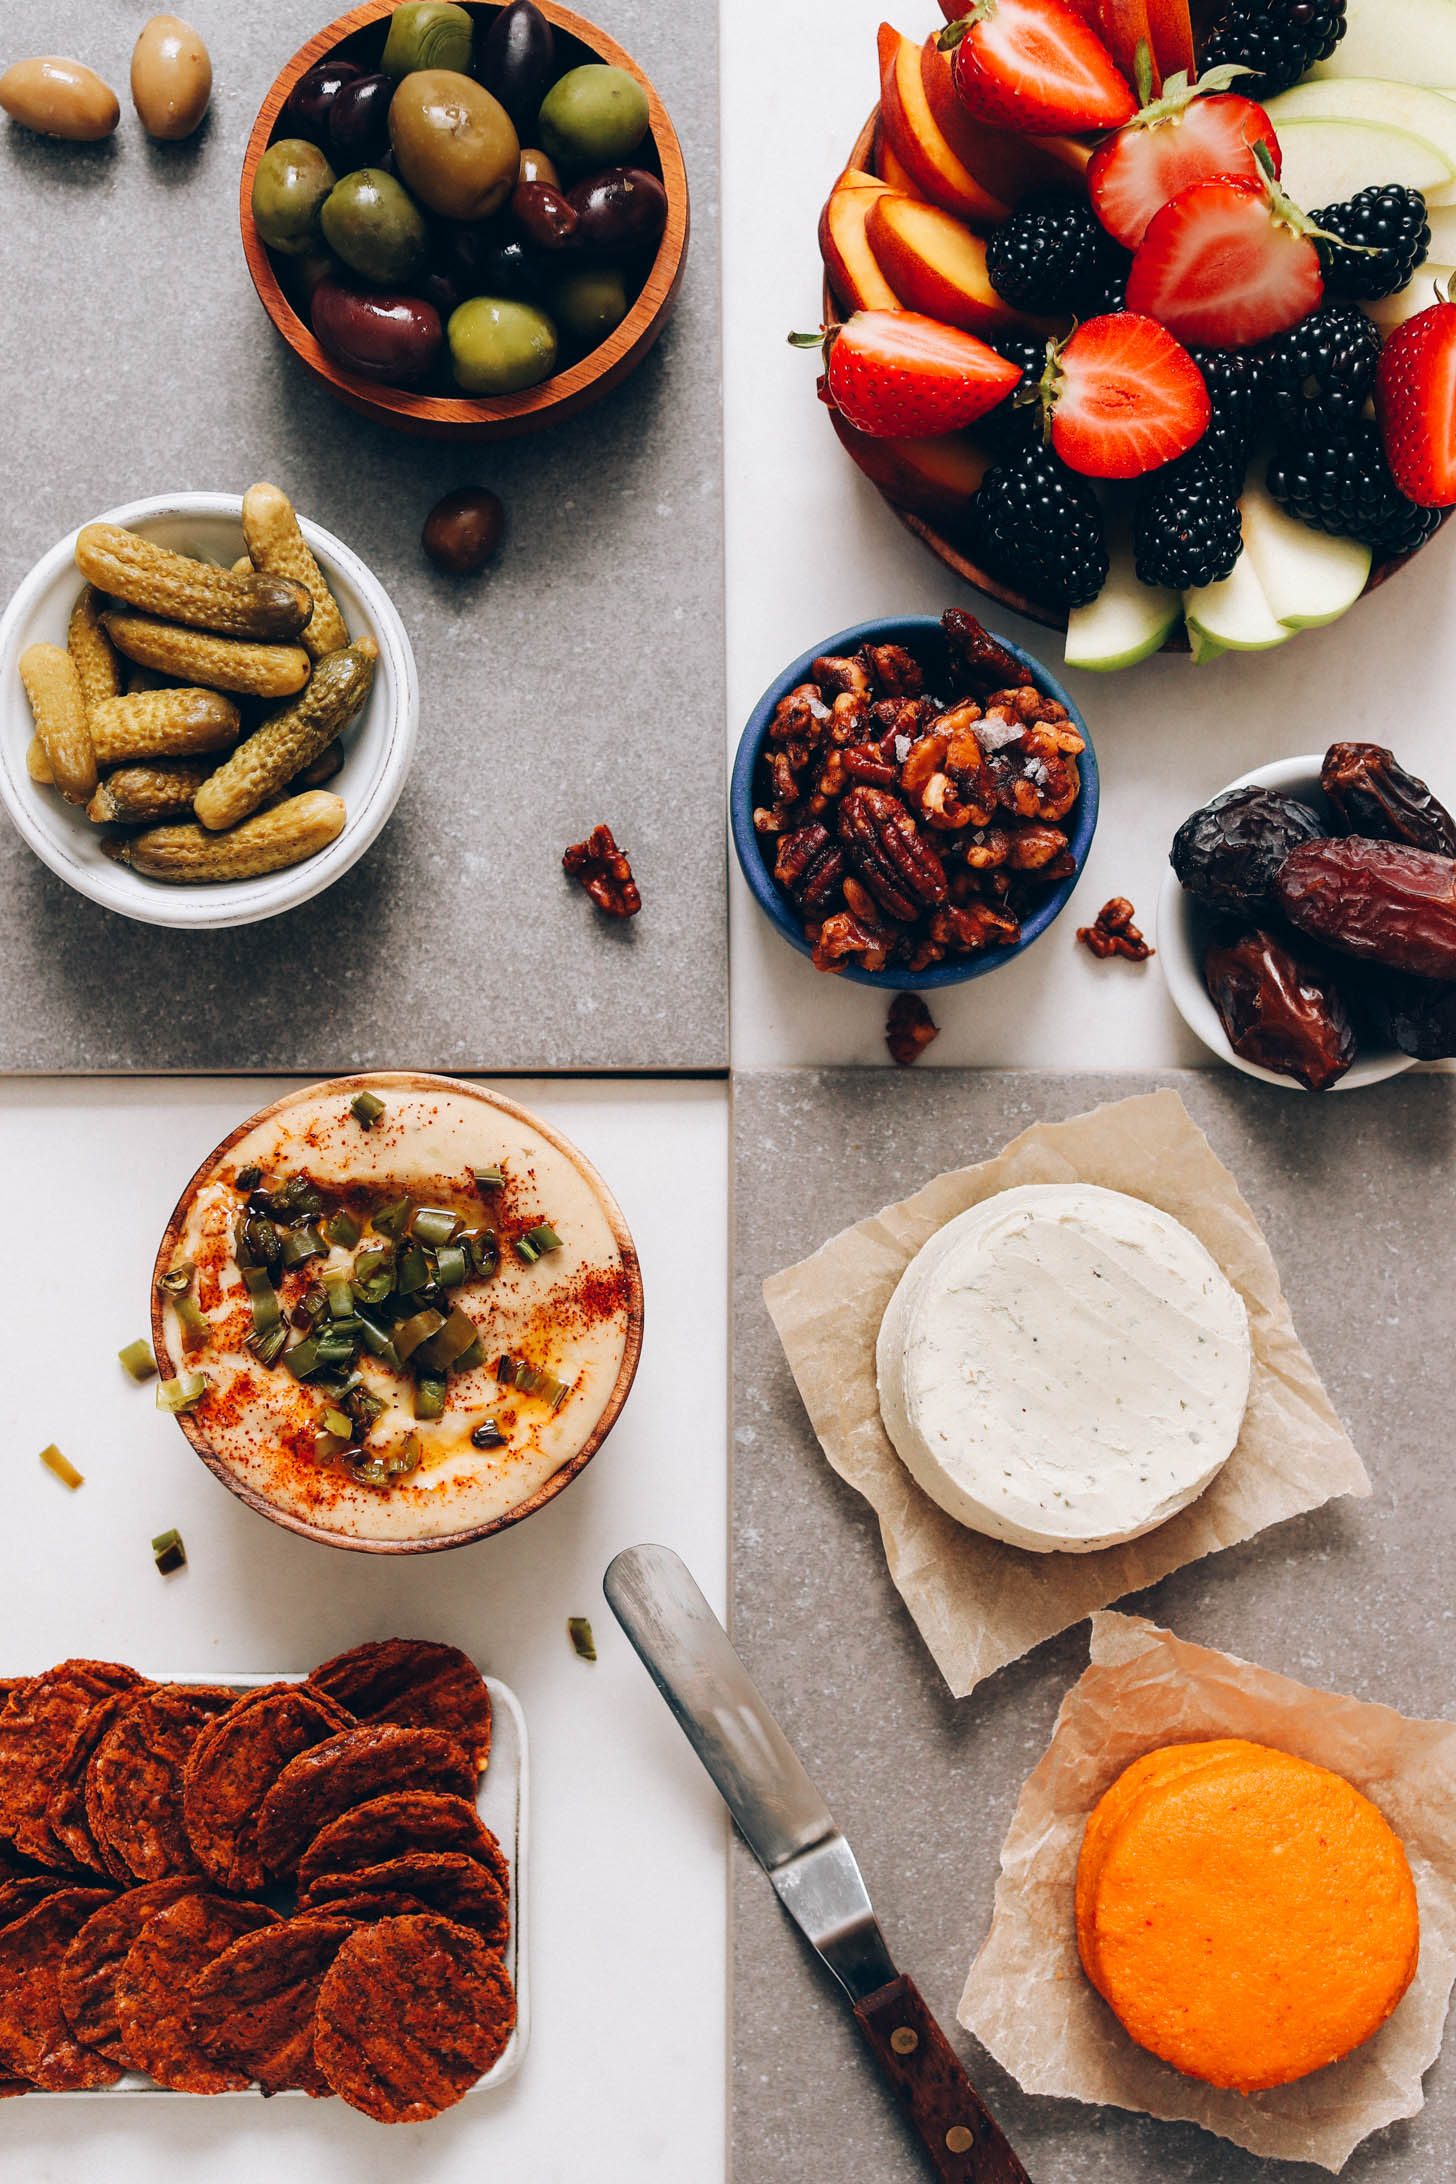 A variety of snacks for a vegan charcuterie board including fresh fruit and vegan cheese